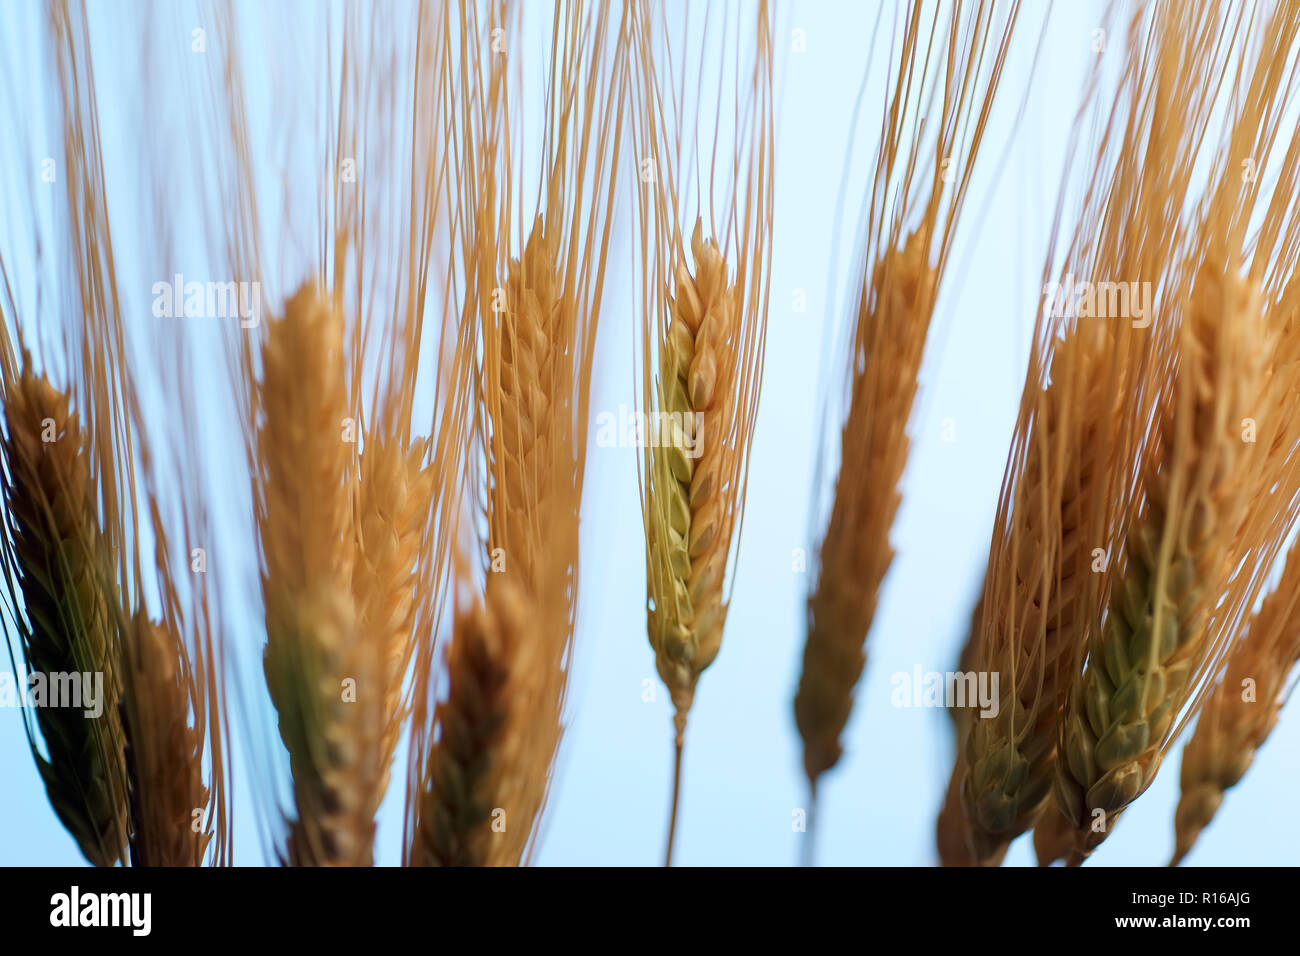 Row of ears of wheat, close up shallow focus Stock Photo